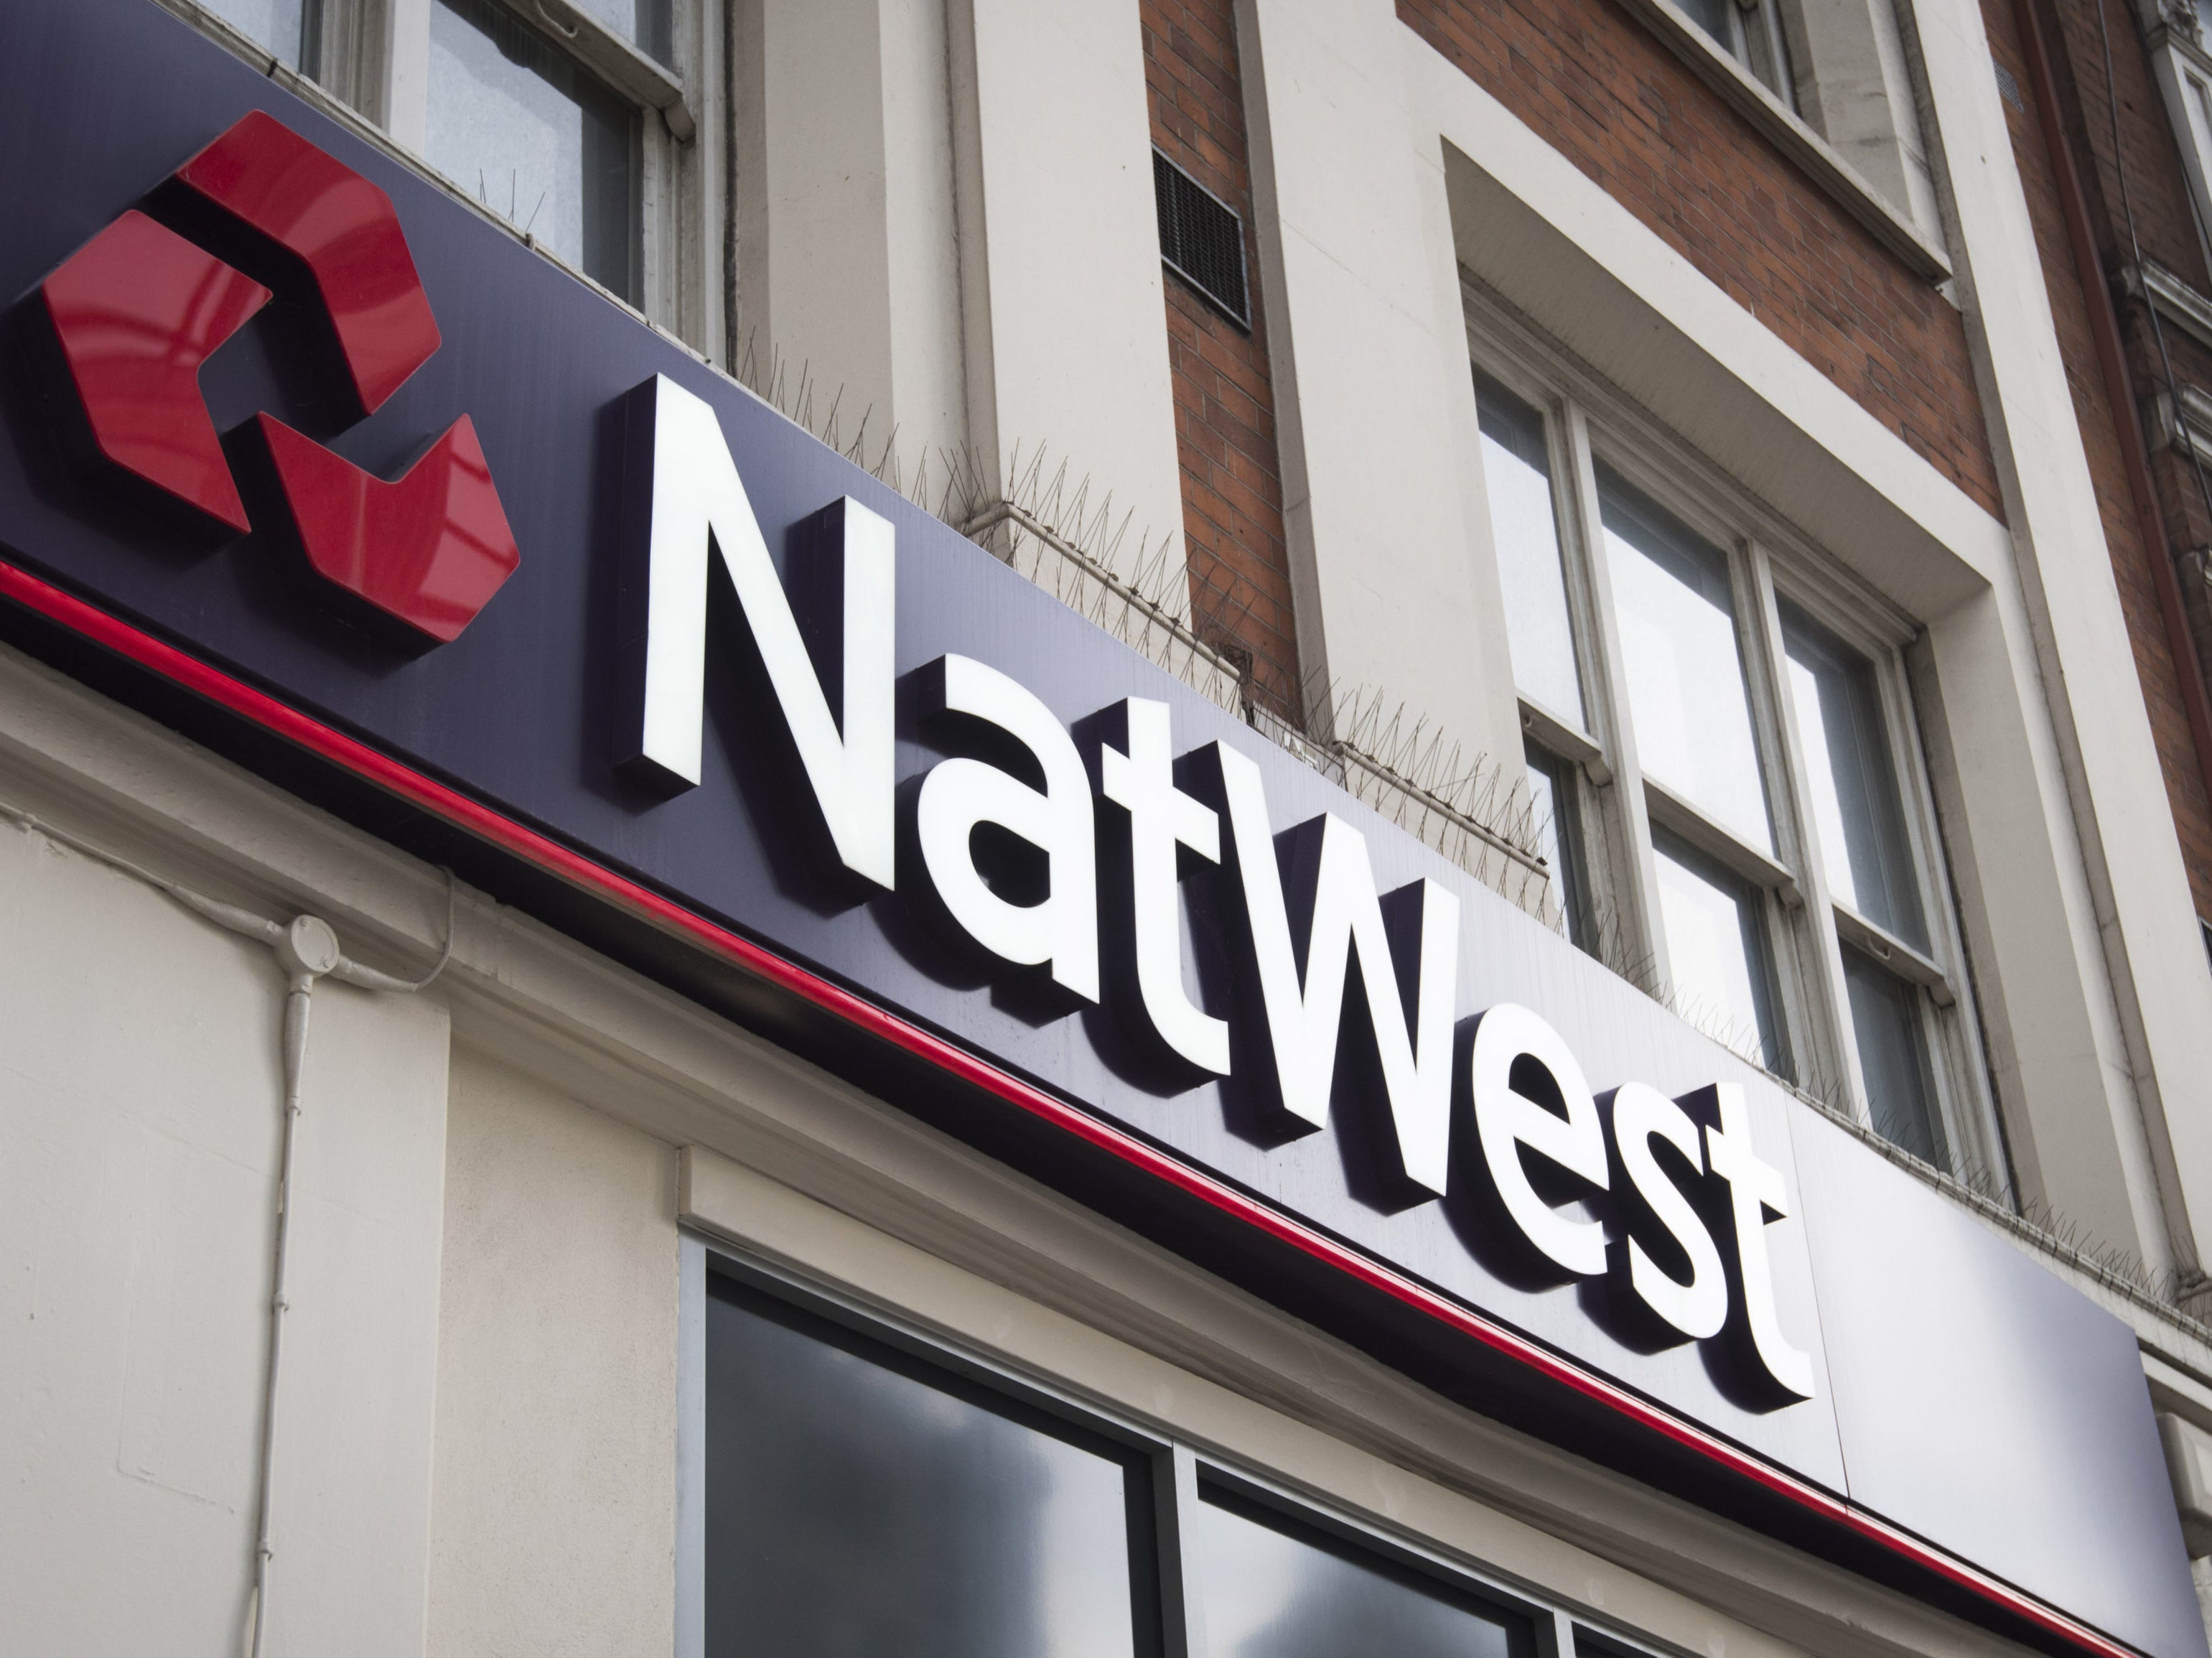 The regulator alleges that ‘increasingly large cash deposits’ were made into the account and NatWest did not have systems and controls in place to properly scrutinise this